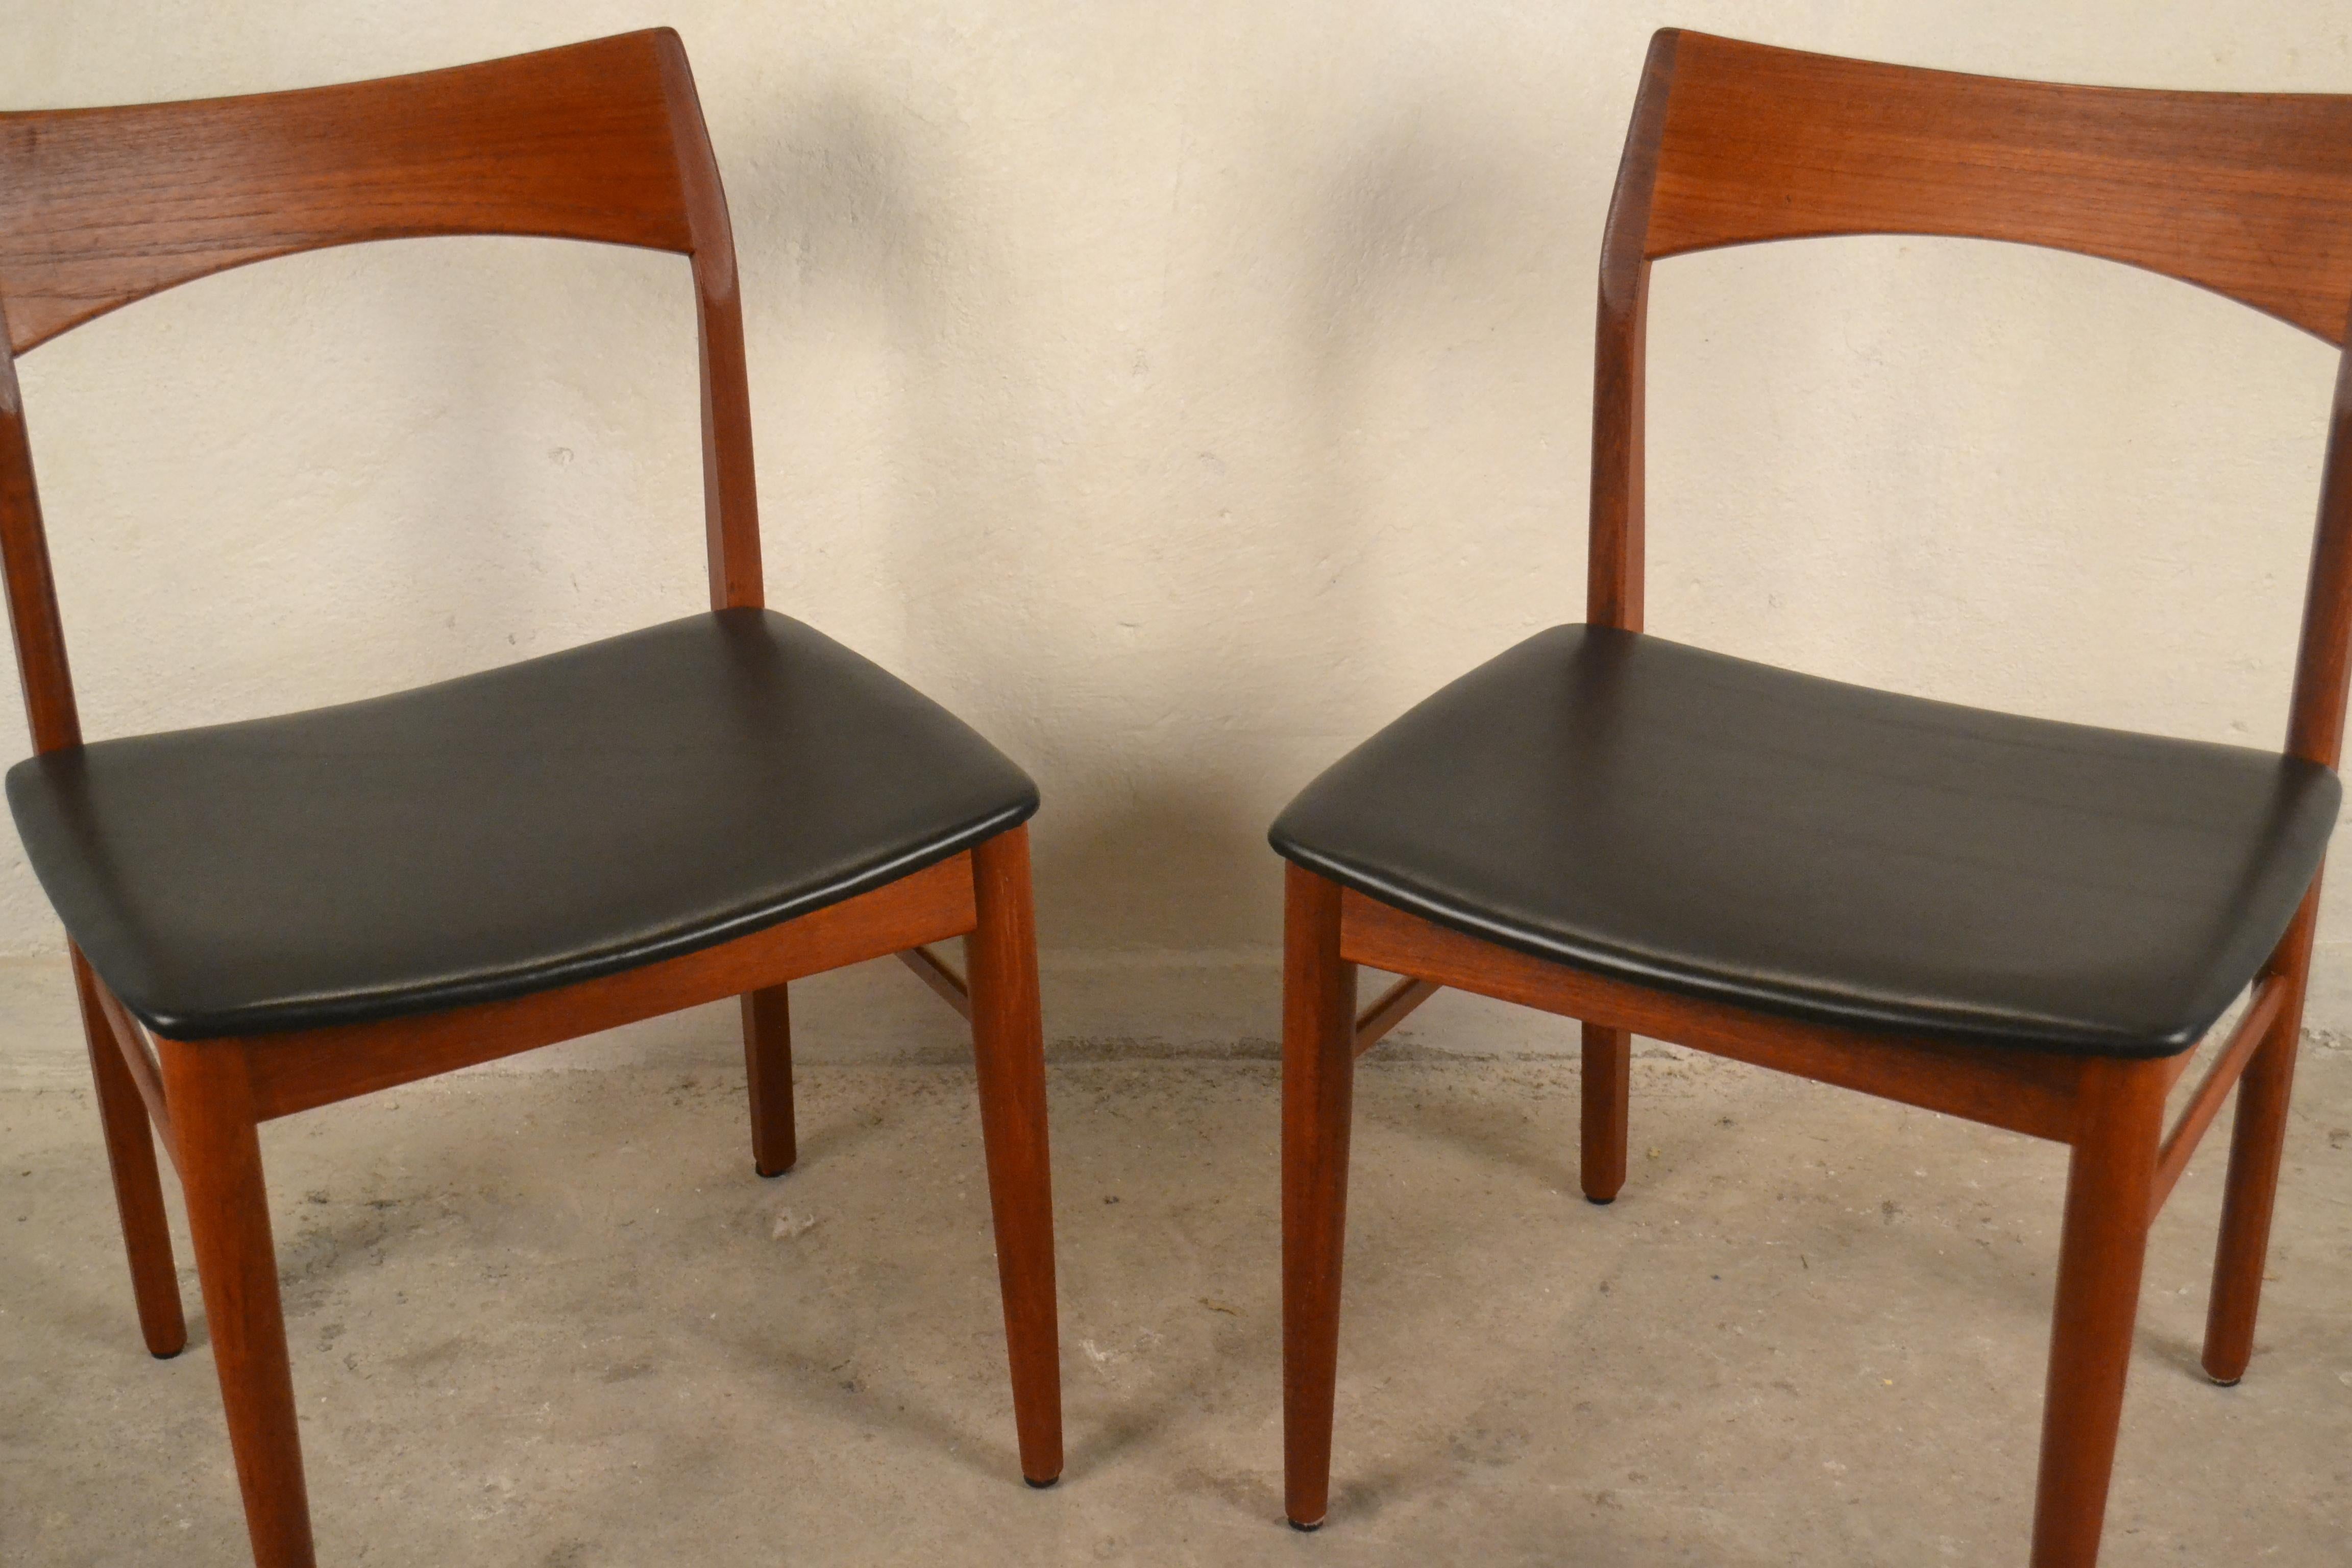 - A pair of chairs designed by Henning Kjaernulfs
- Made in the 1960s by Vejle Mobelfabrik
- Original and signed
- Seats covered with natural leather.